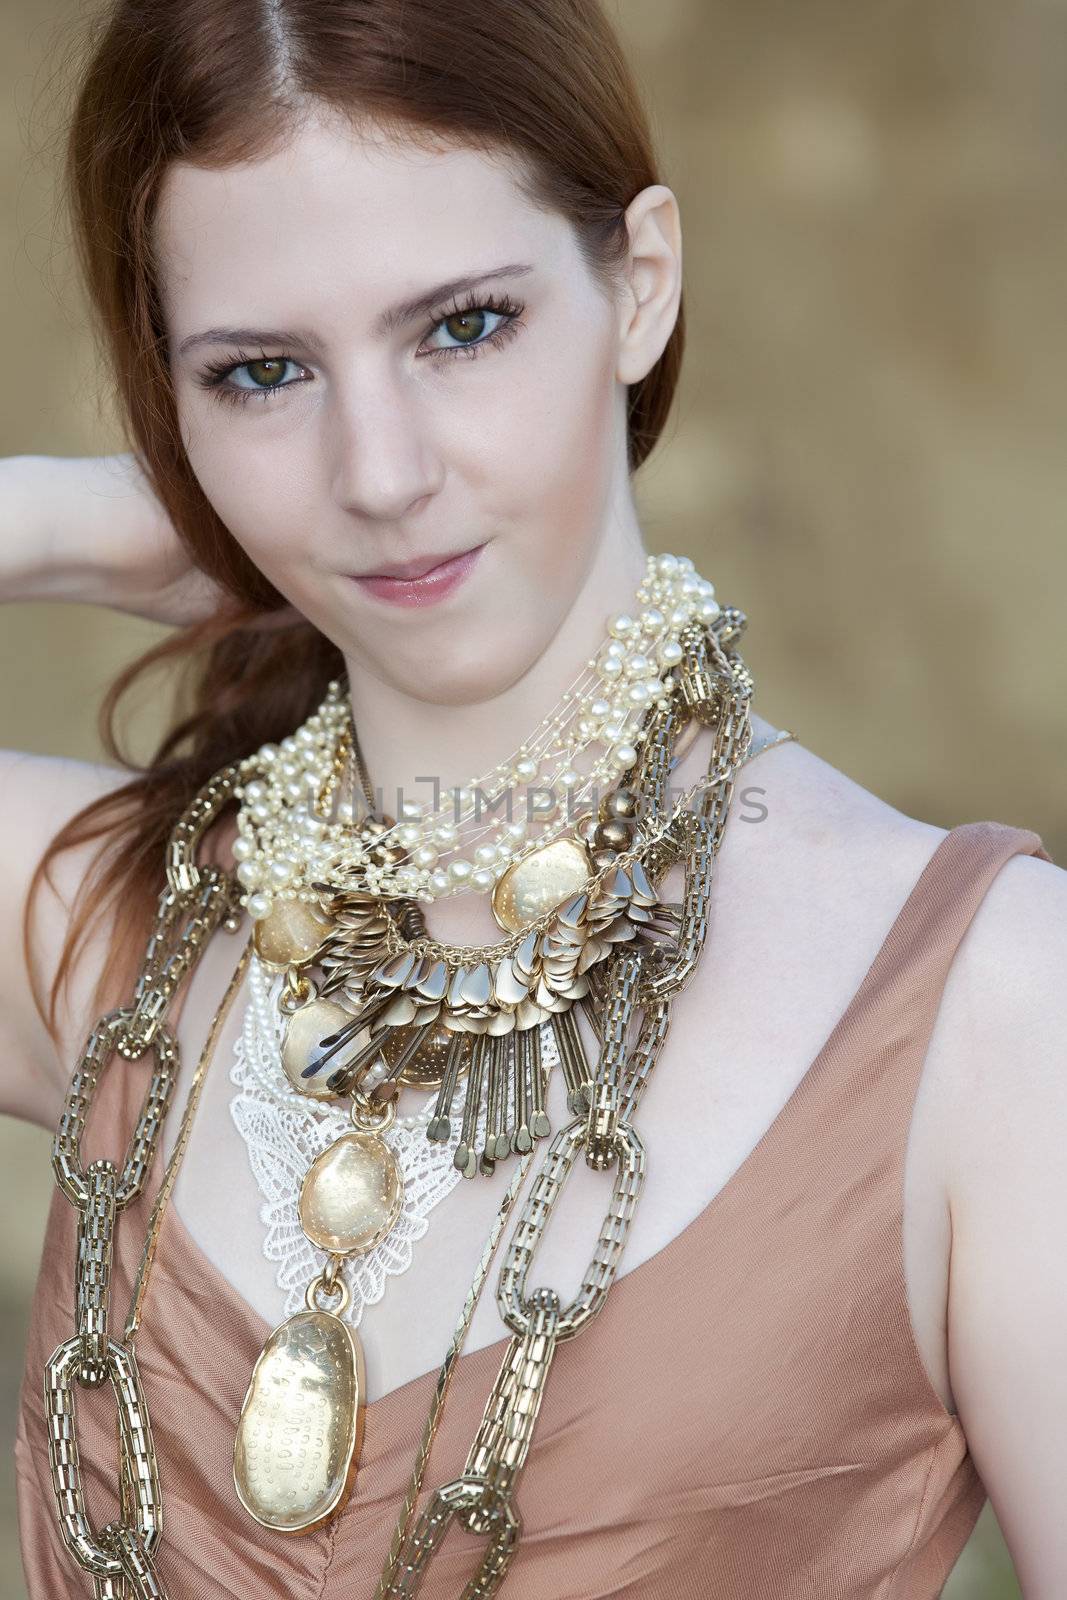 A young woman with beautiful milky skin and red hair wearing Bohemian jewellery